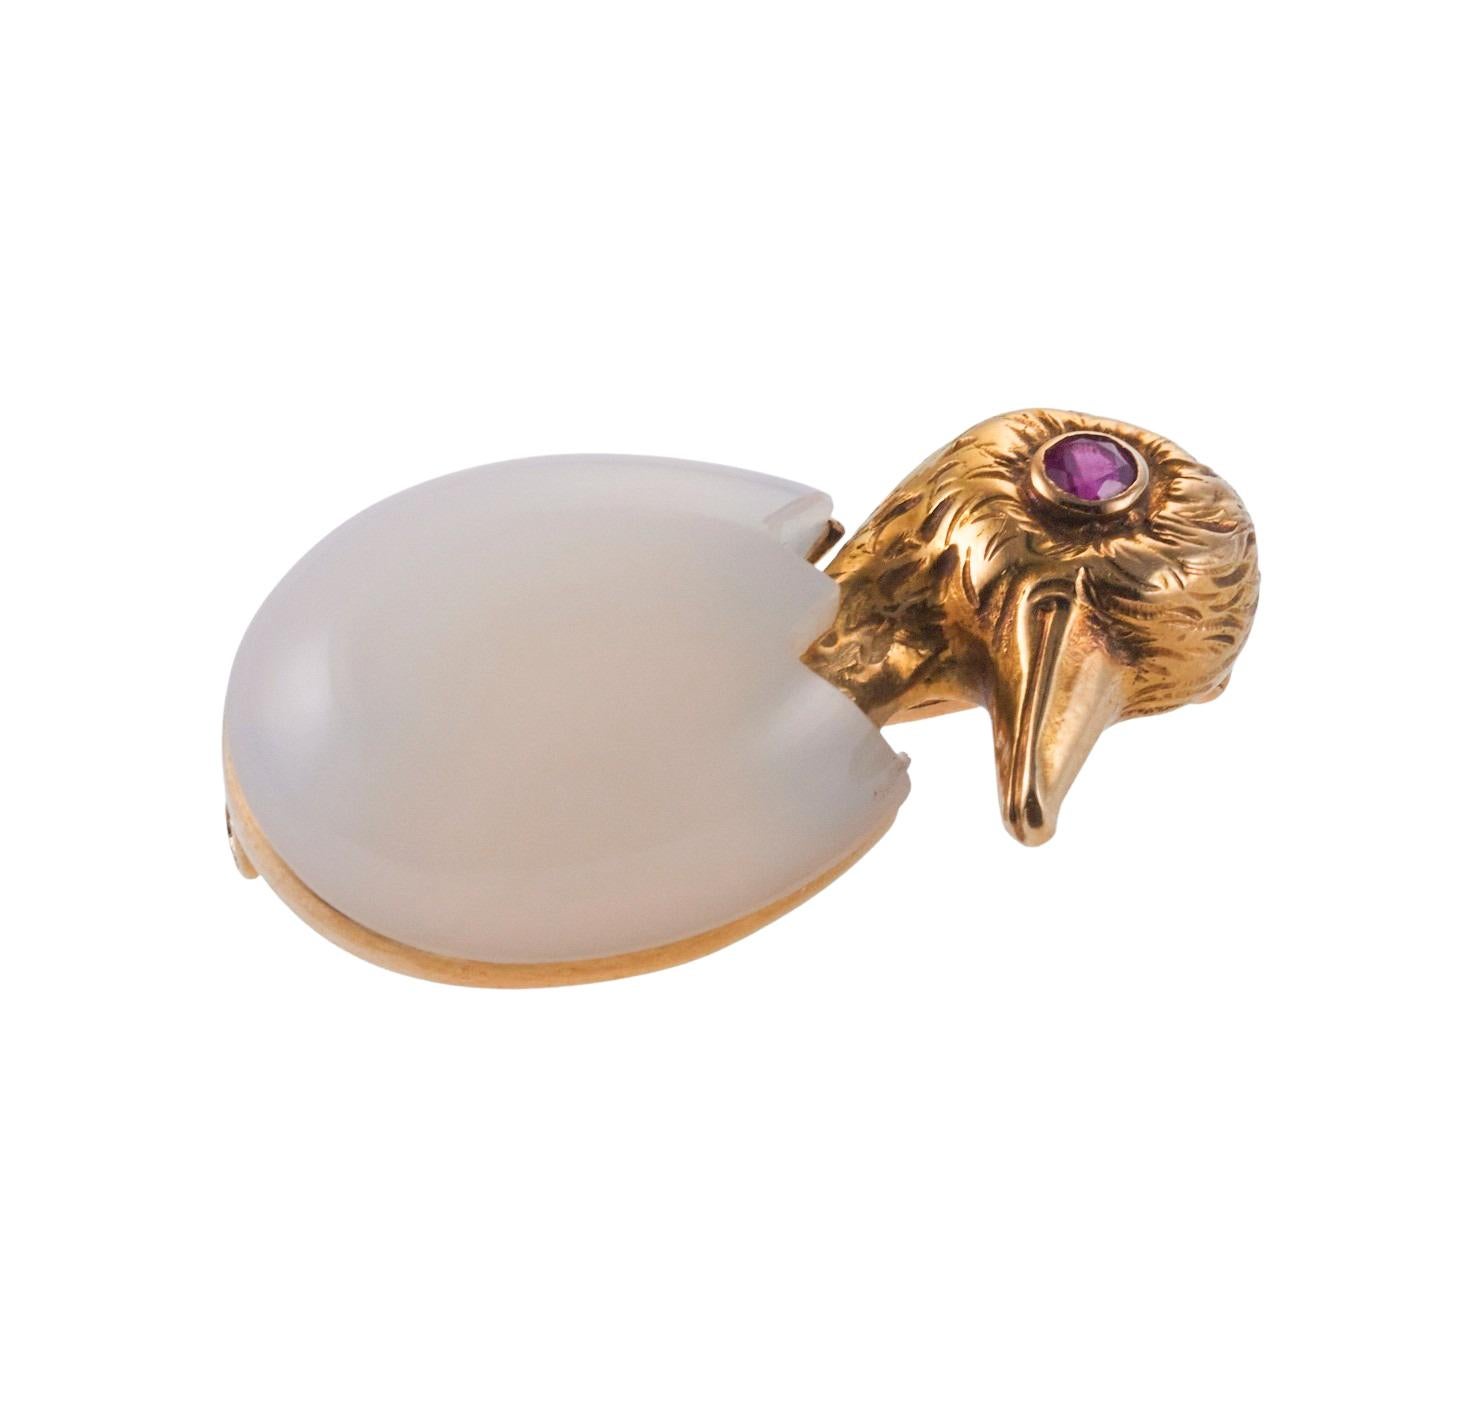 Adorable Cartier Chalcedony Ruby Gold Duckling in an Egg Brooch 1